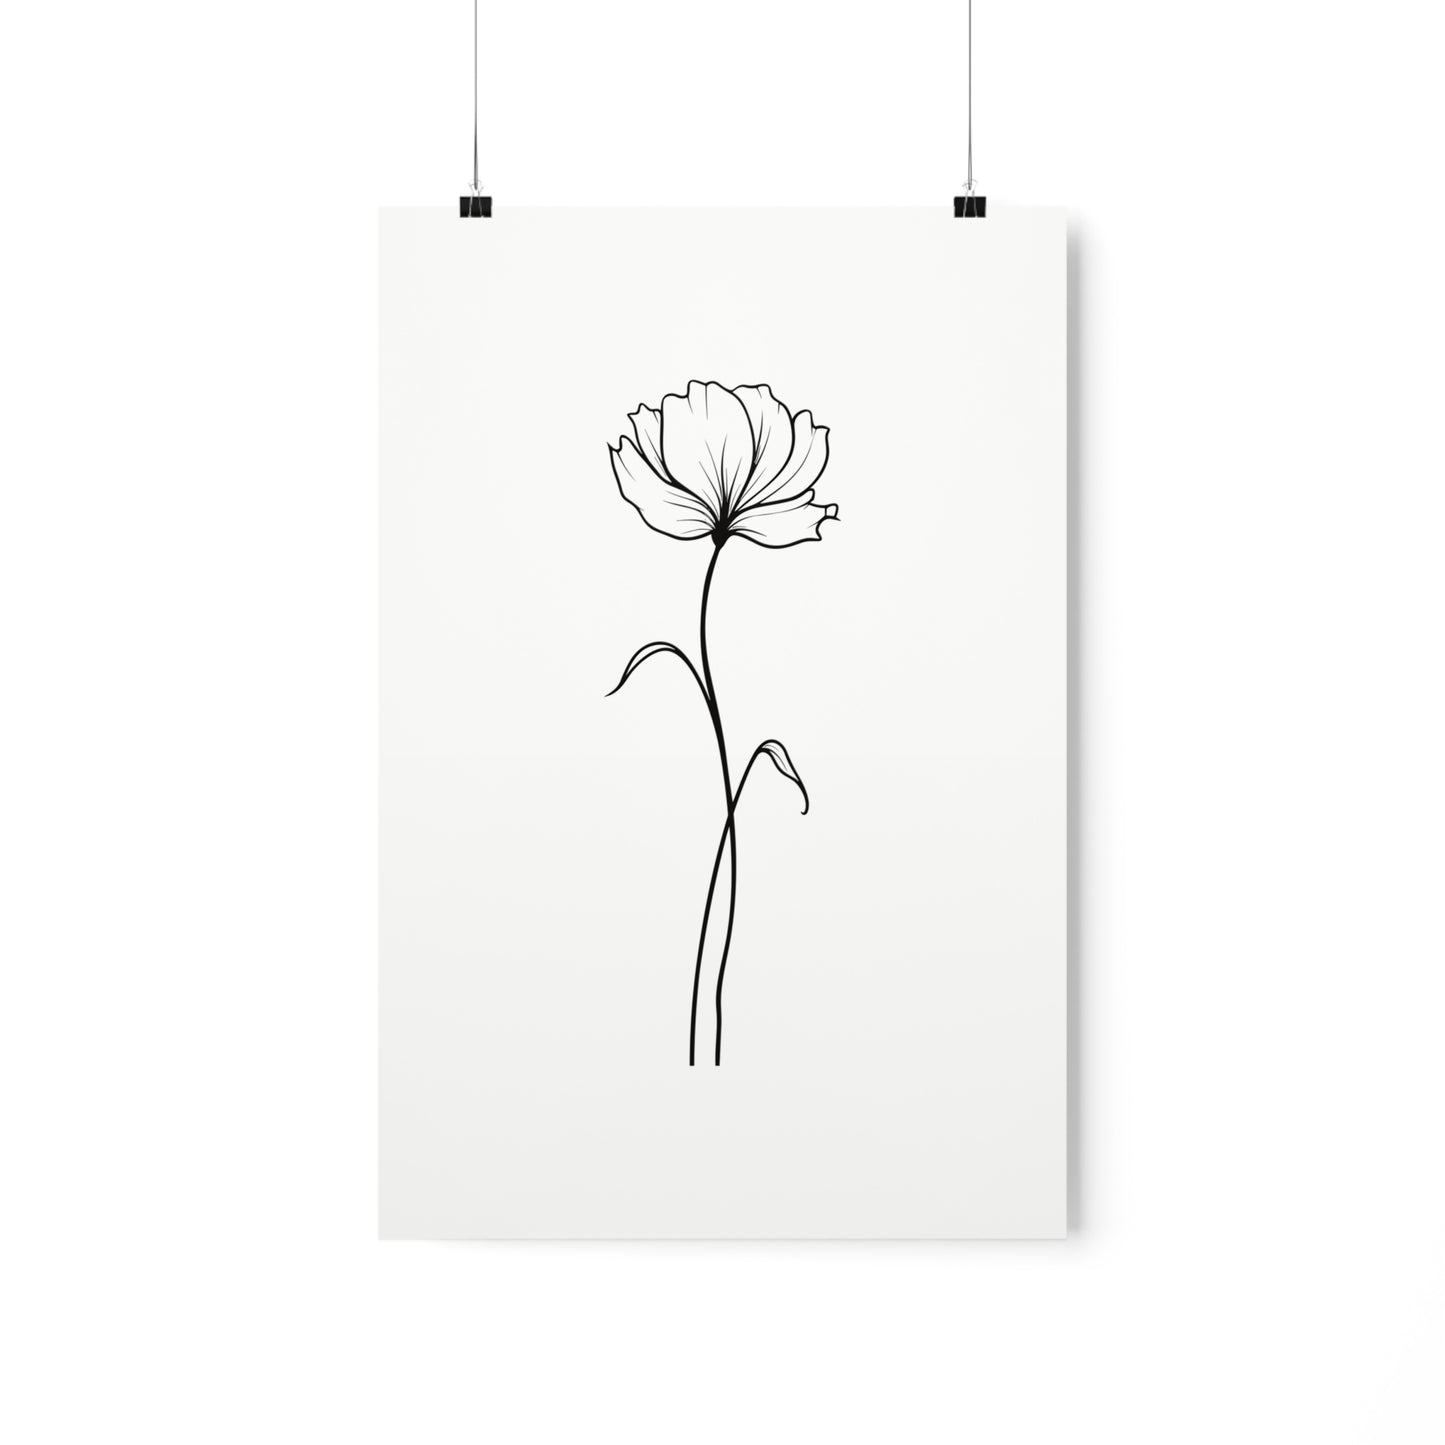 Flower Line Drawing Poster, Minimalist Black White Retro Vintage Print Picture Wall Art Vertical Artwork Small Large Decor Paper Starcove Fashion